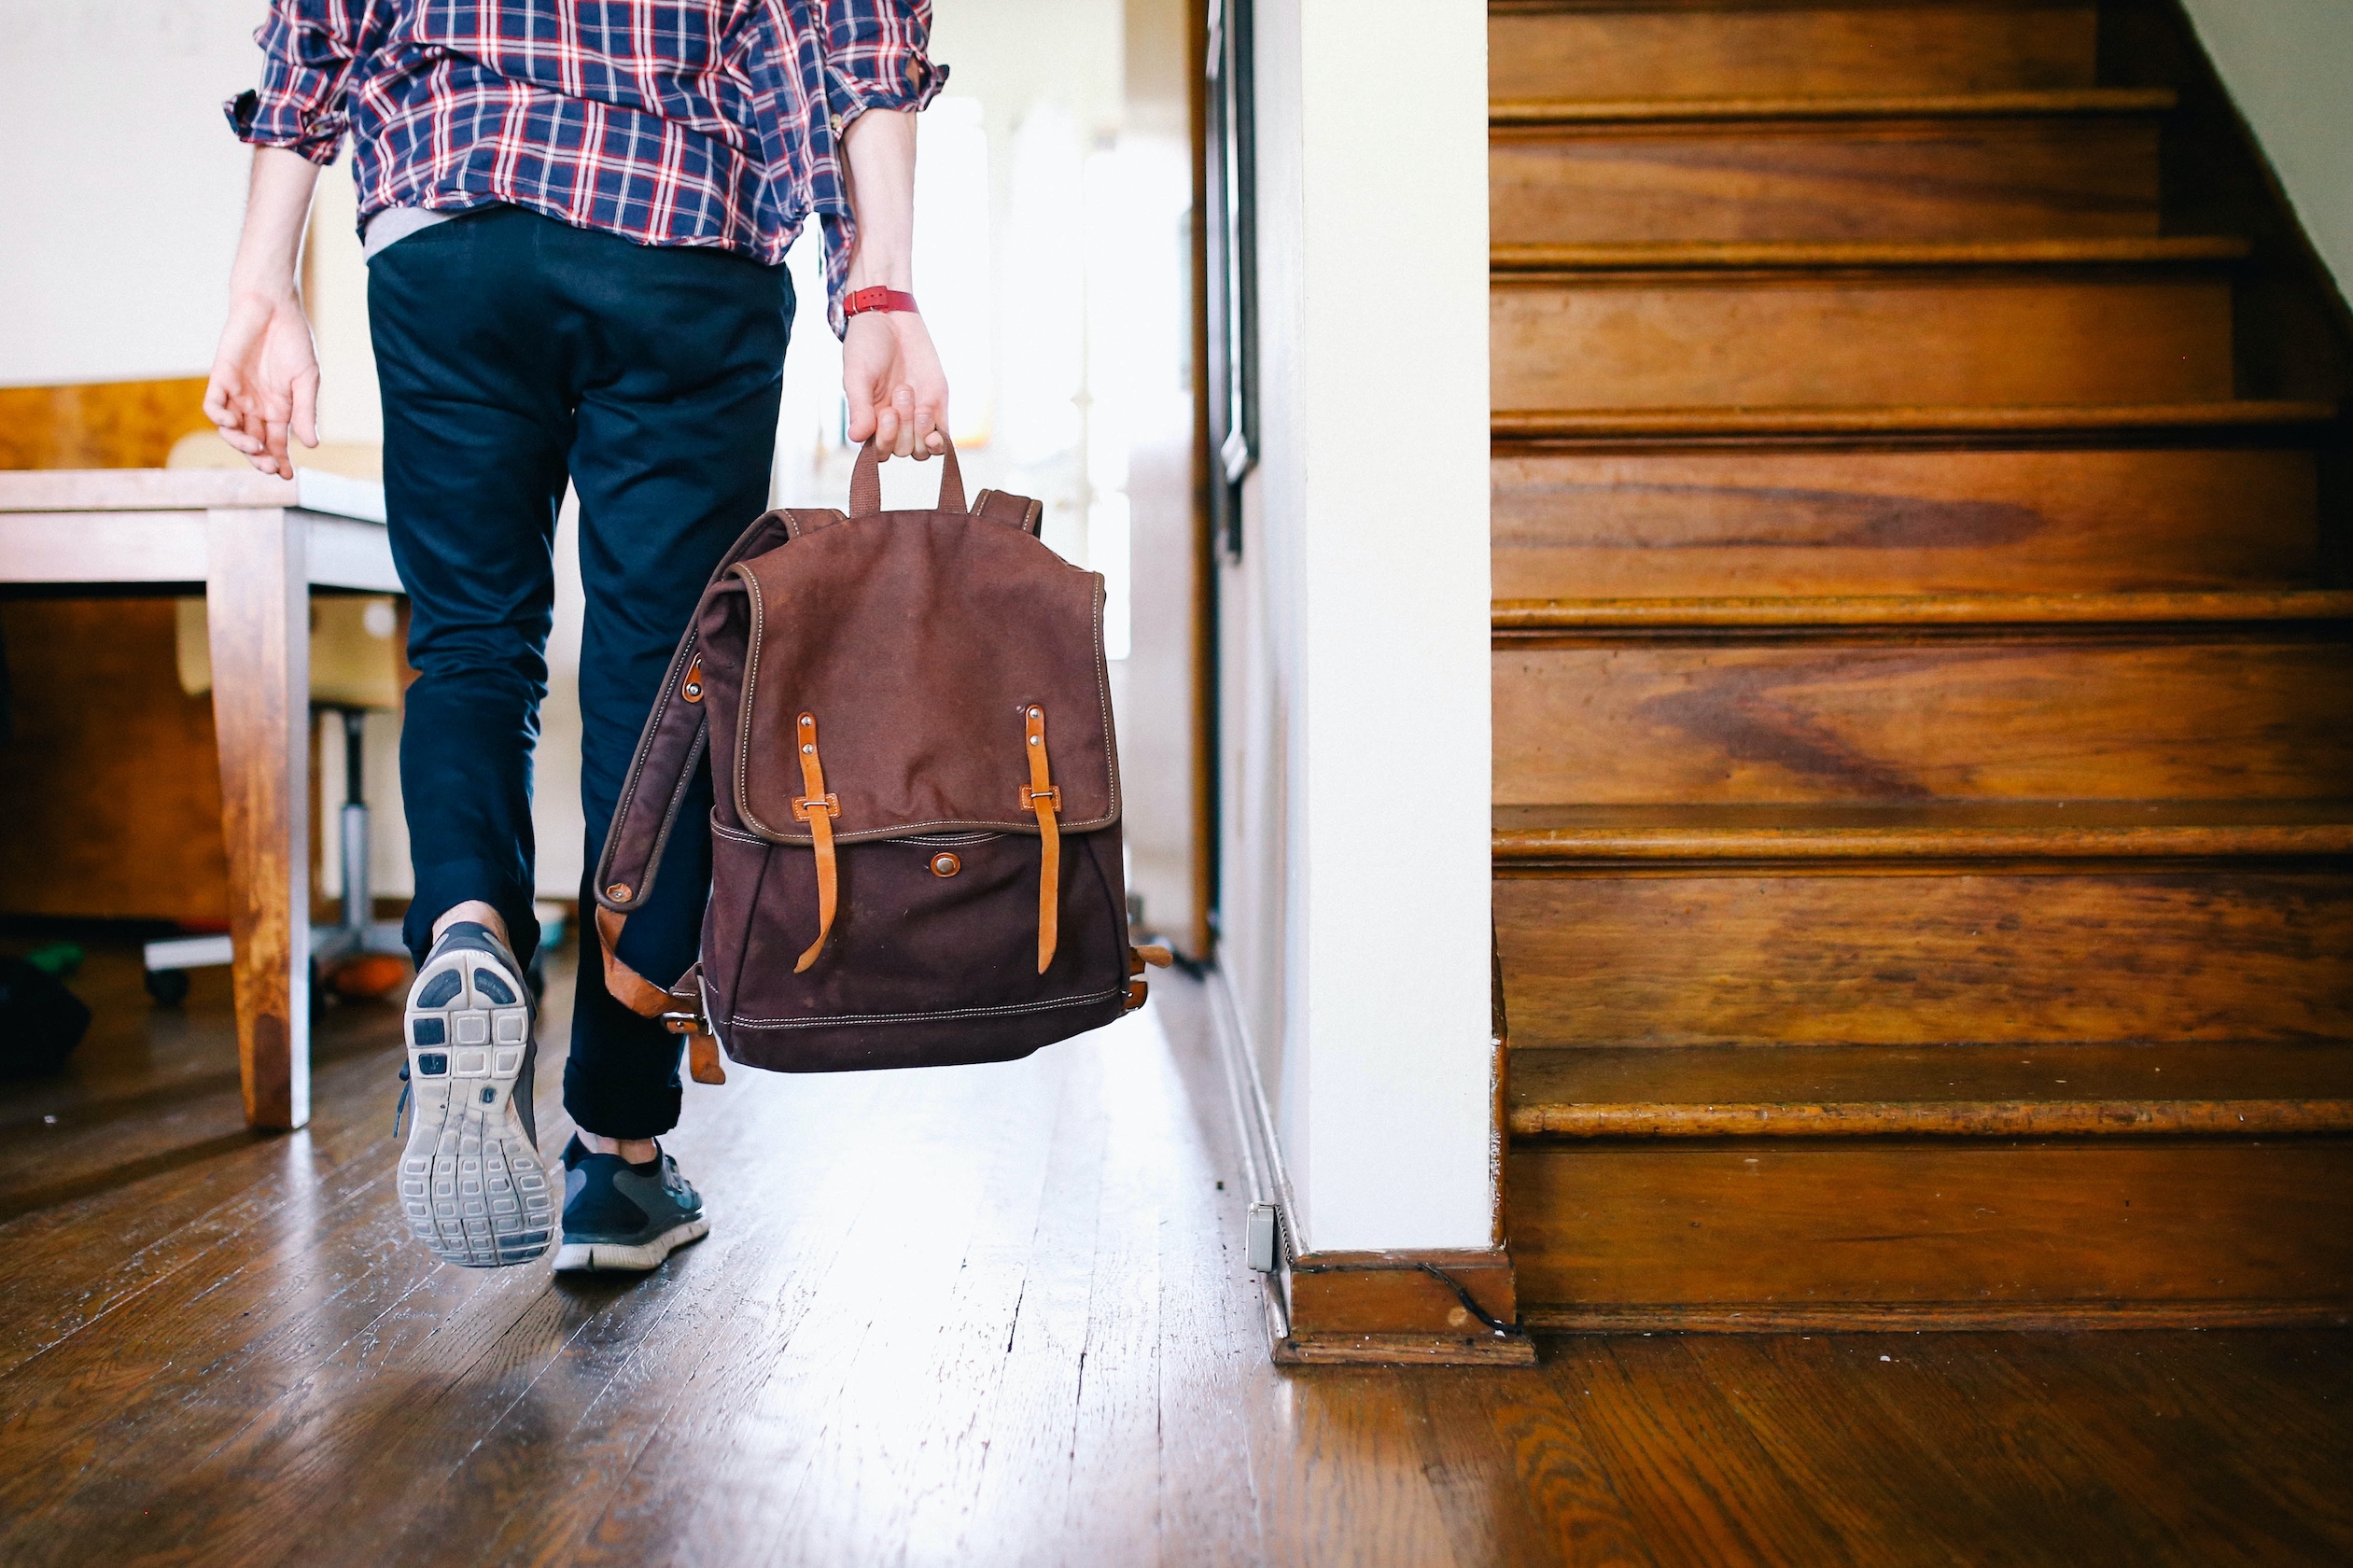 Photo of a person walking through their home wearing sneakers and carrying a backpack.